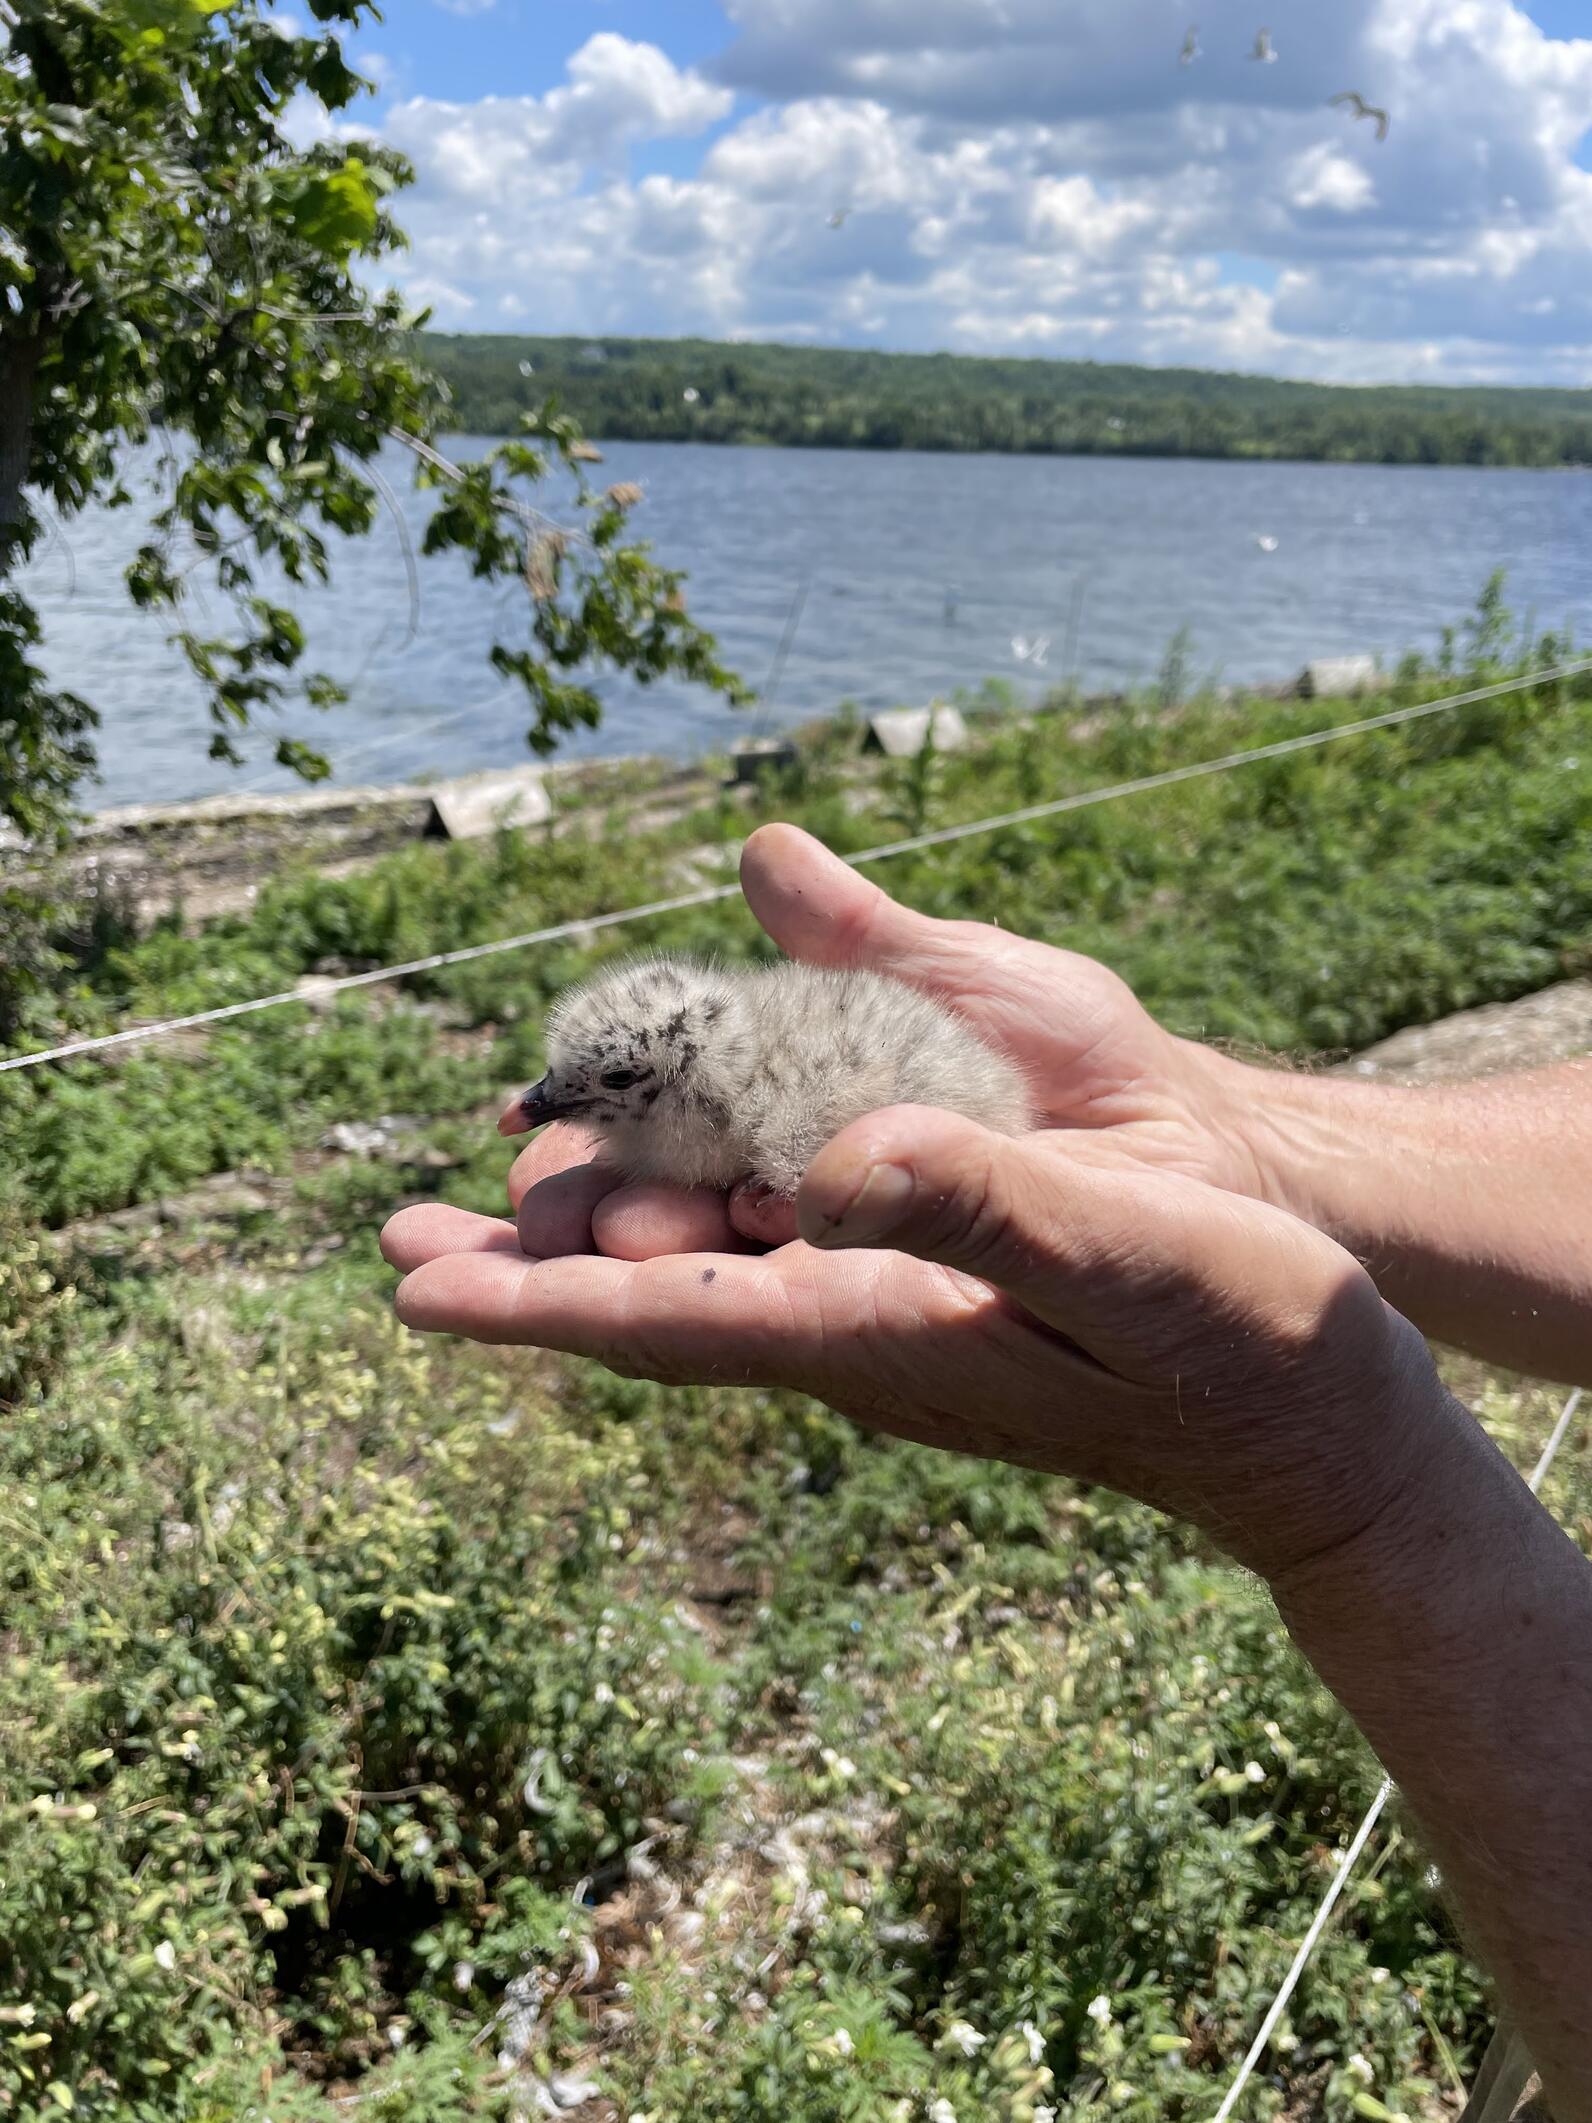 Conservation program manager Mark LaBarr holds a Common Tern chick.